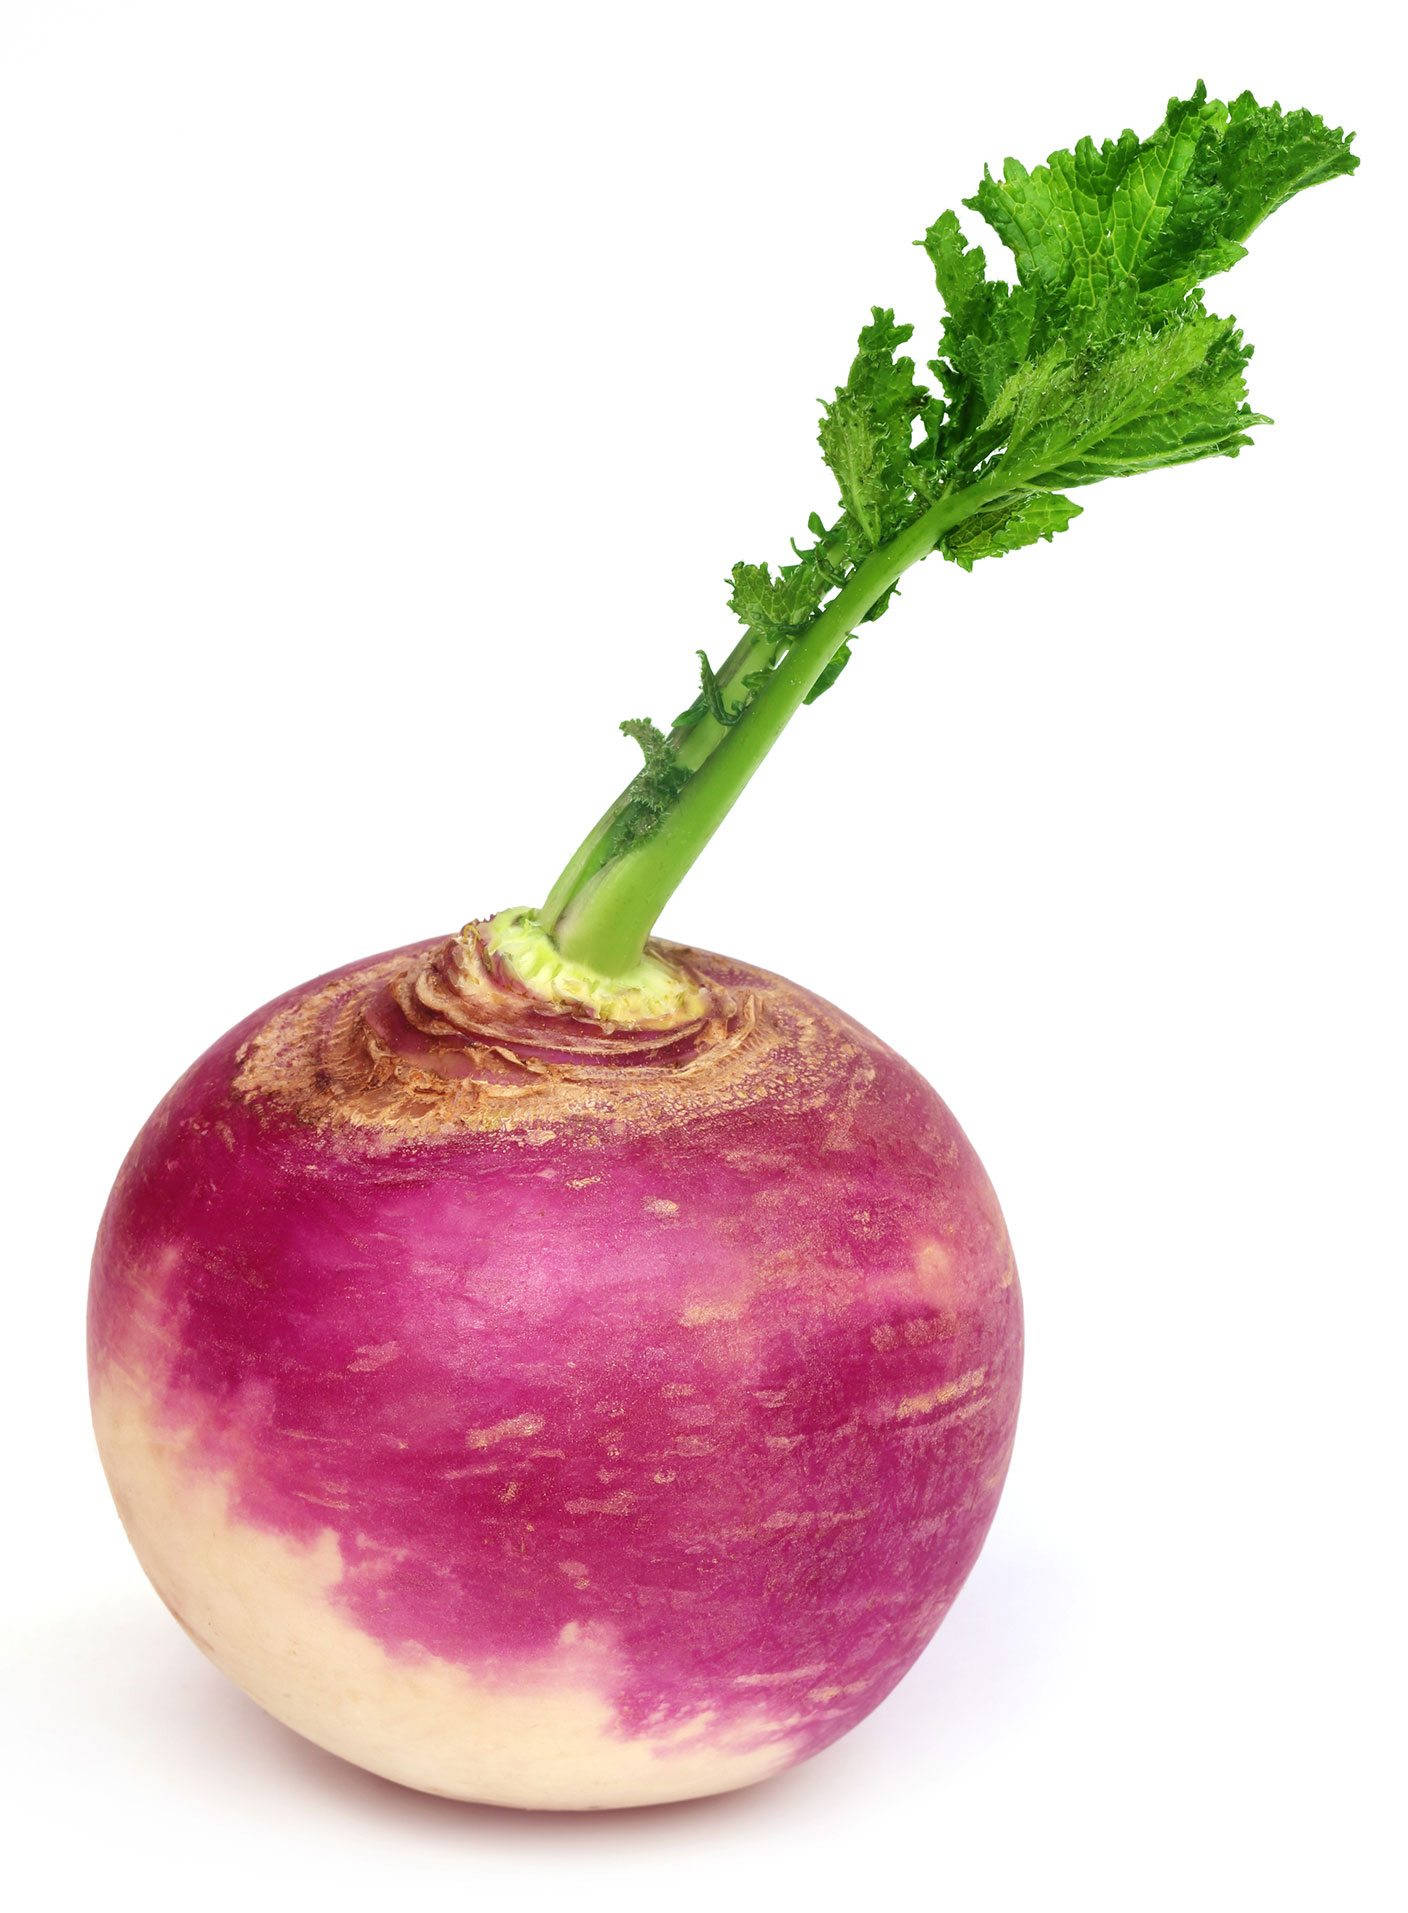 Turnip With Leaf In White Wallpaper